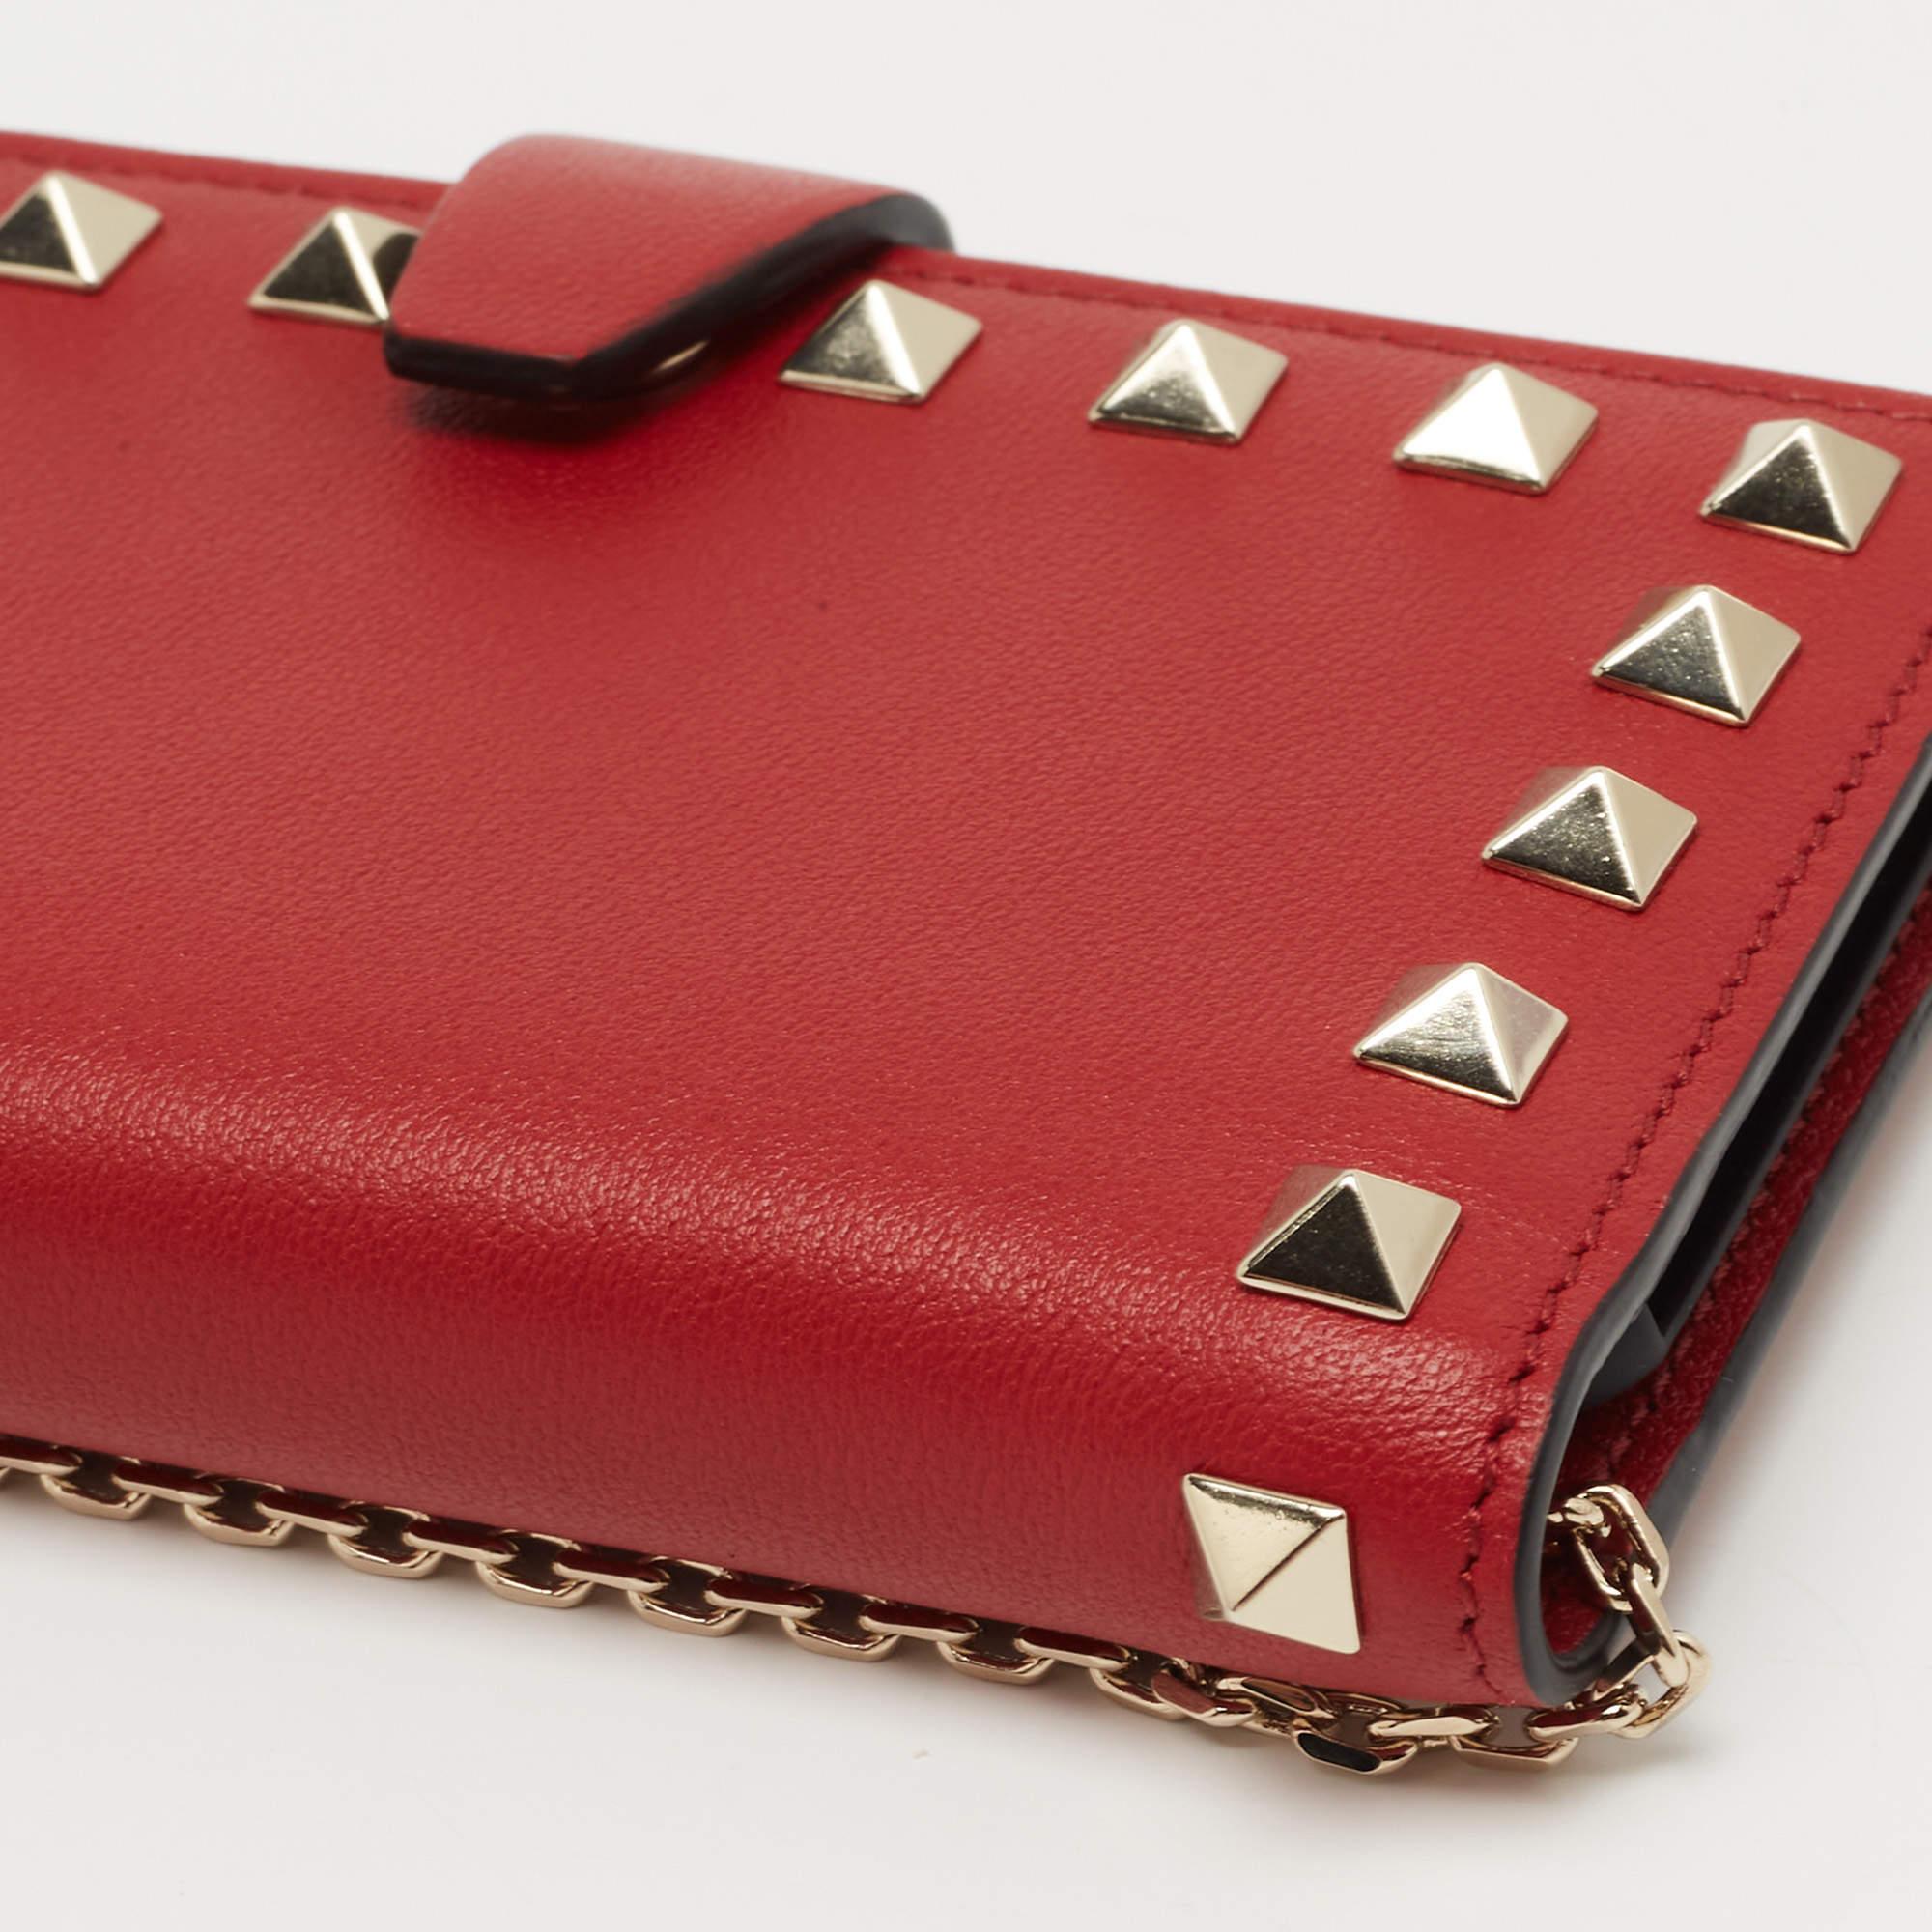 Valentino Red Leather Rockstud Chain Phone Case 2